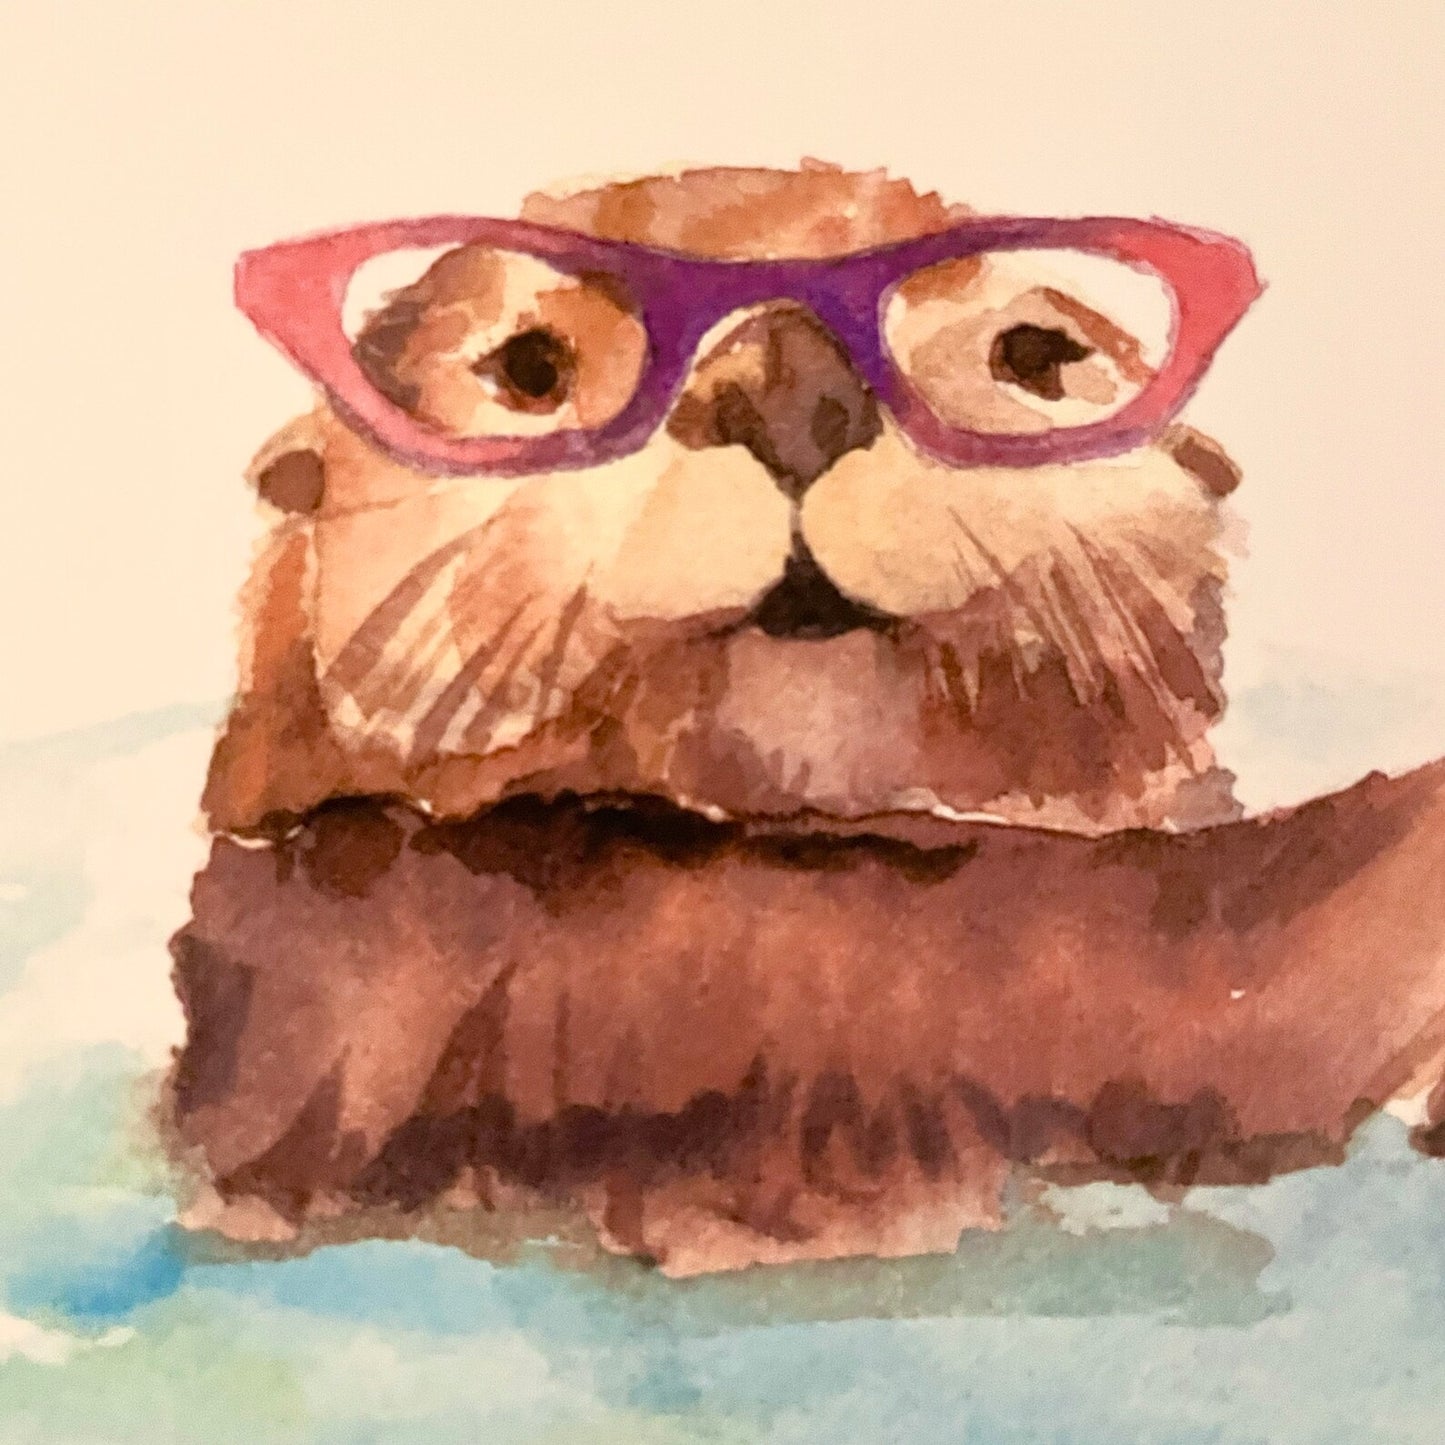 Otters in Glasses Print